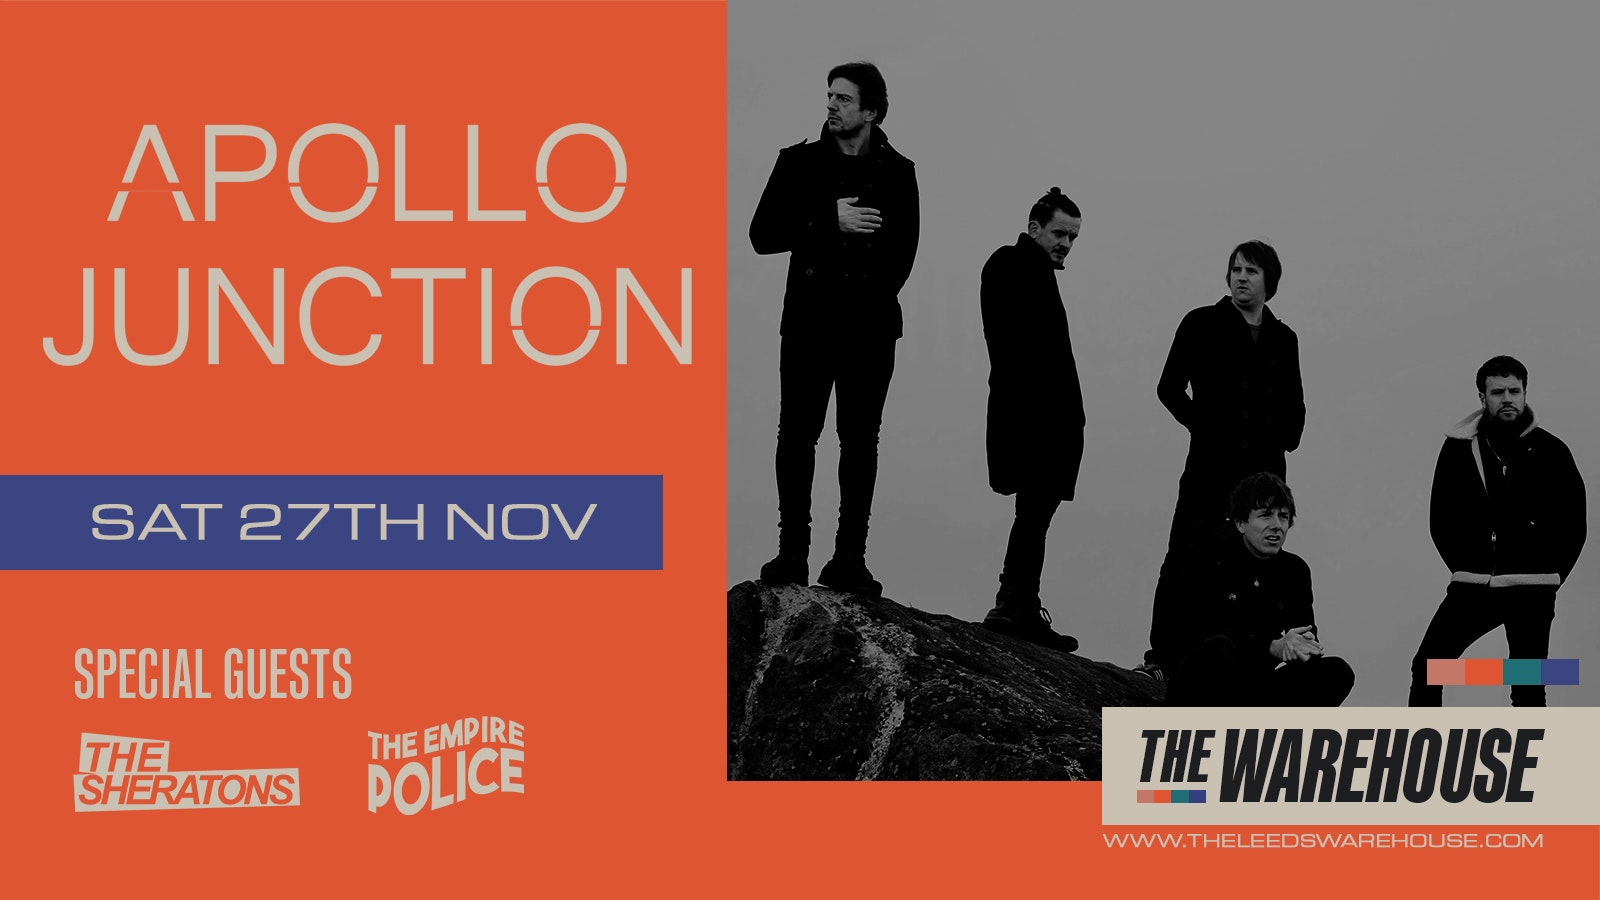 Apollo Junction + The Sheratons and The Empire Police – LIVE